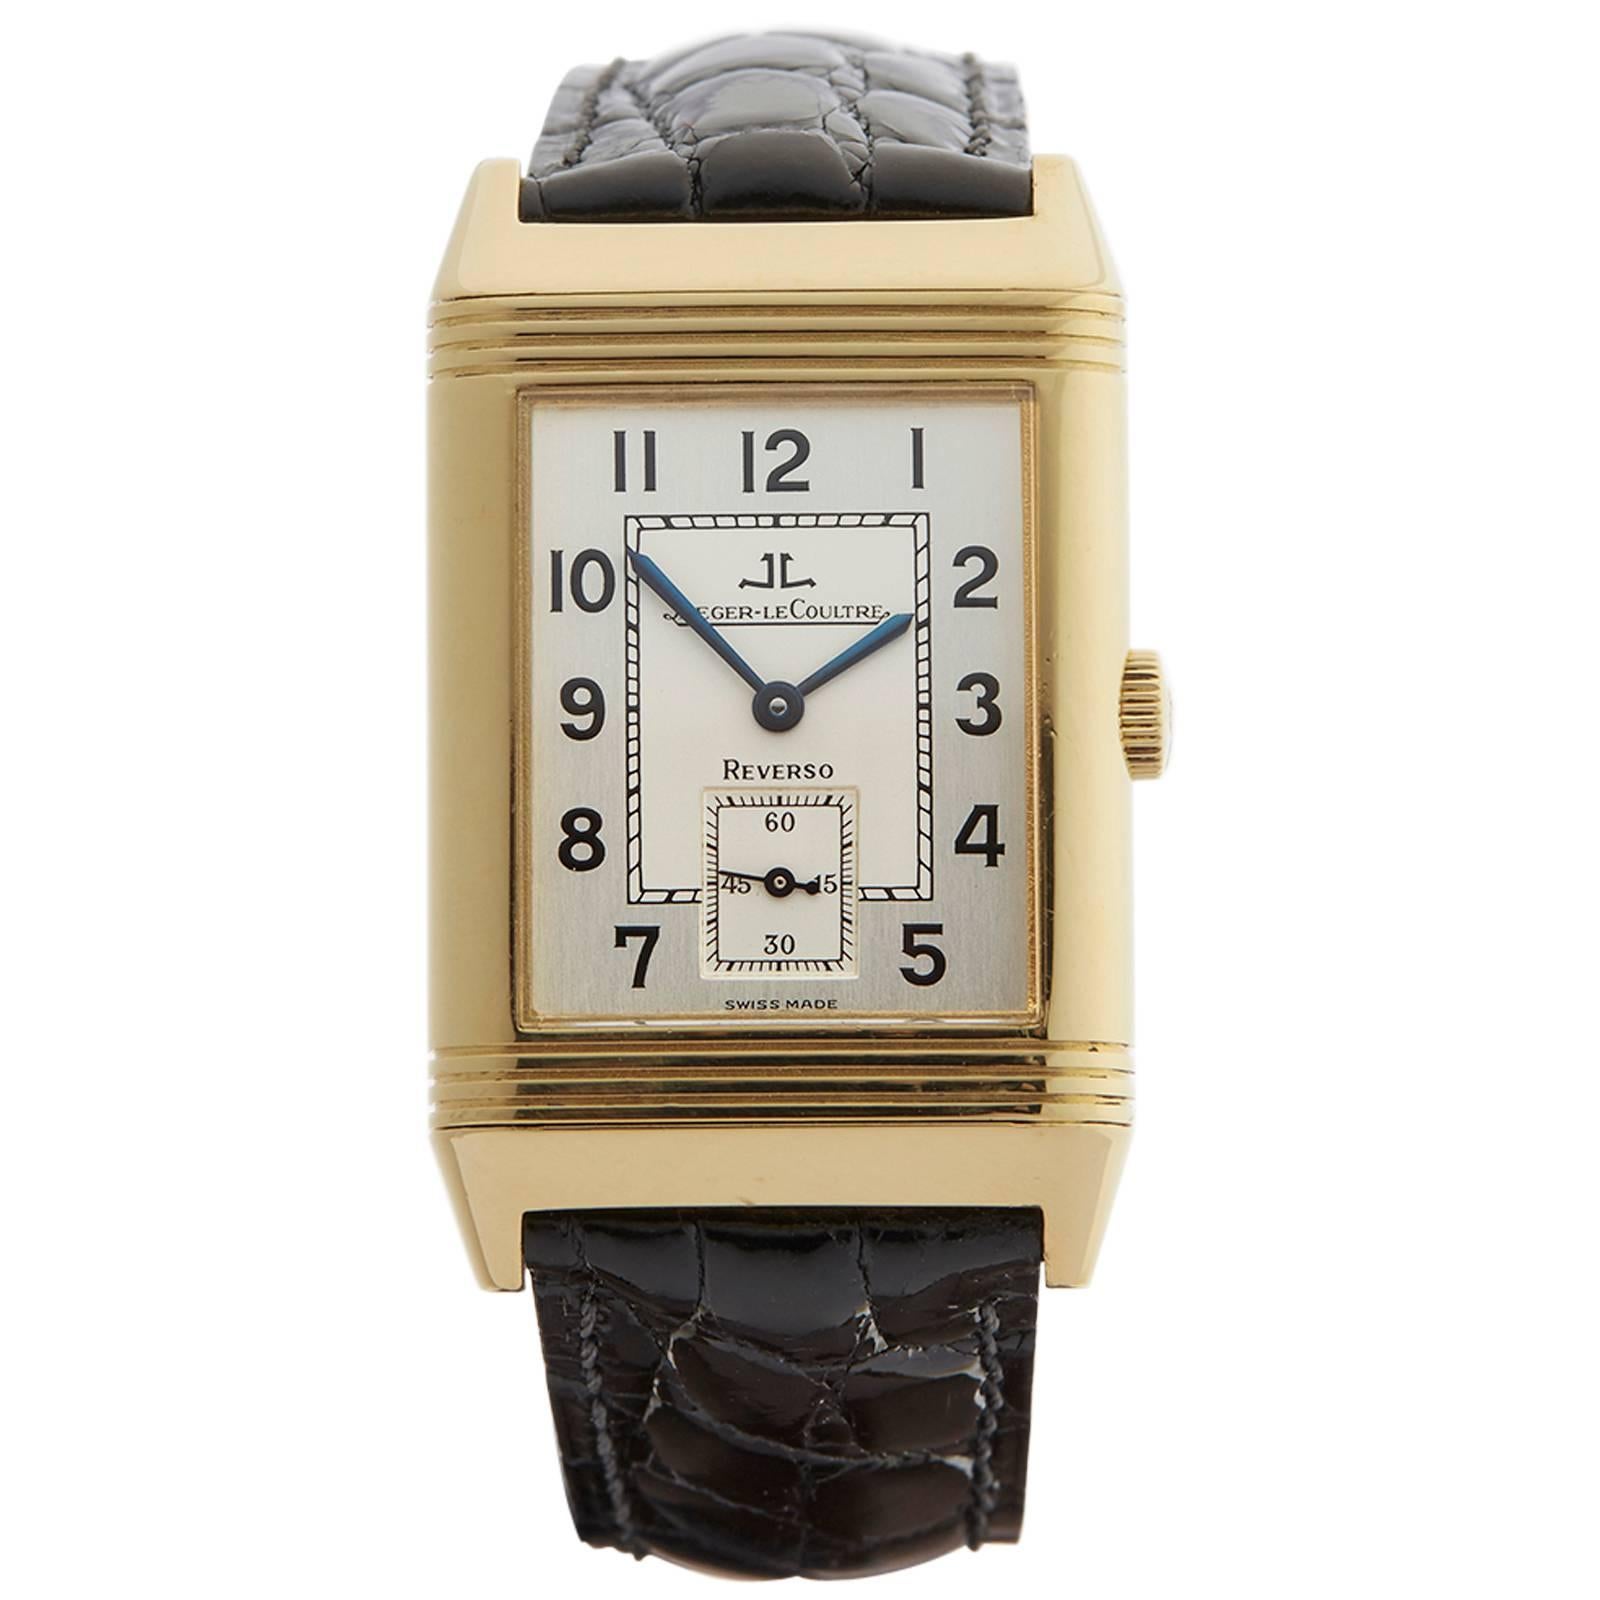 Jaeger-LeCoultre Yellow Gold Reverso Mechanical Wind Wristwatch